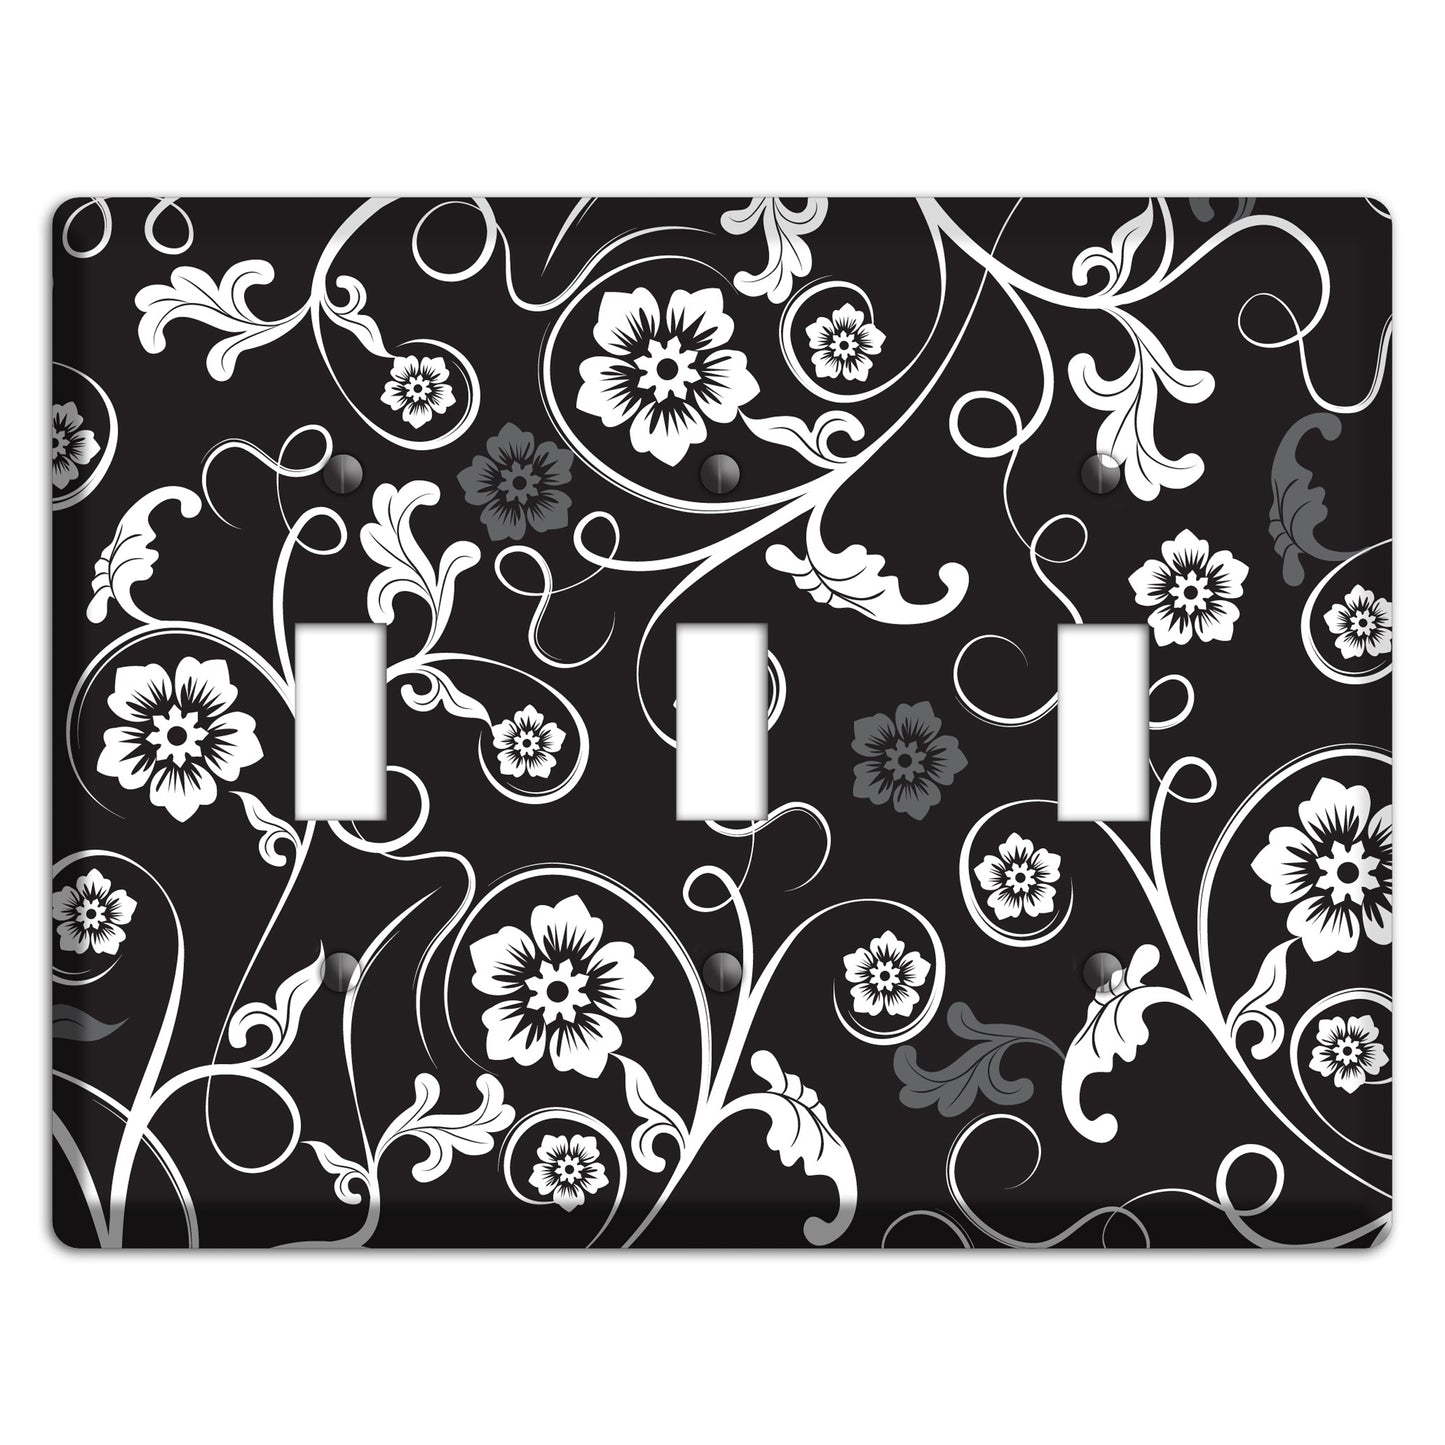 Black with White Flower Sprig 3 Toggle Wallplate